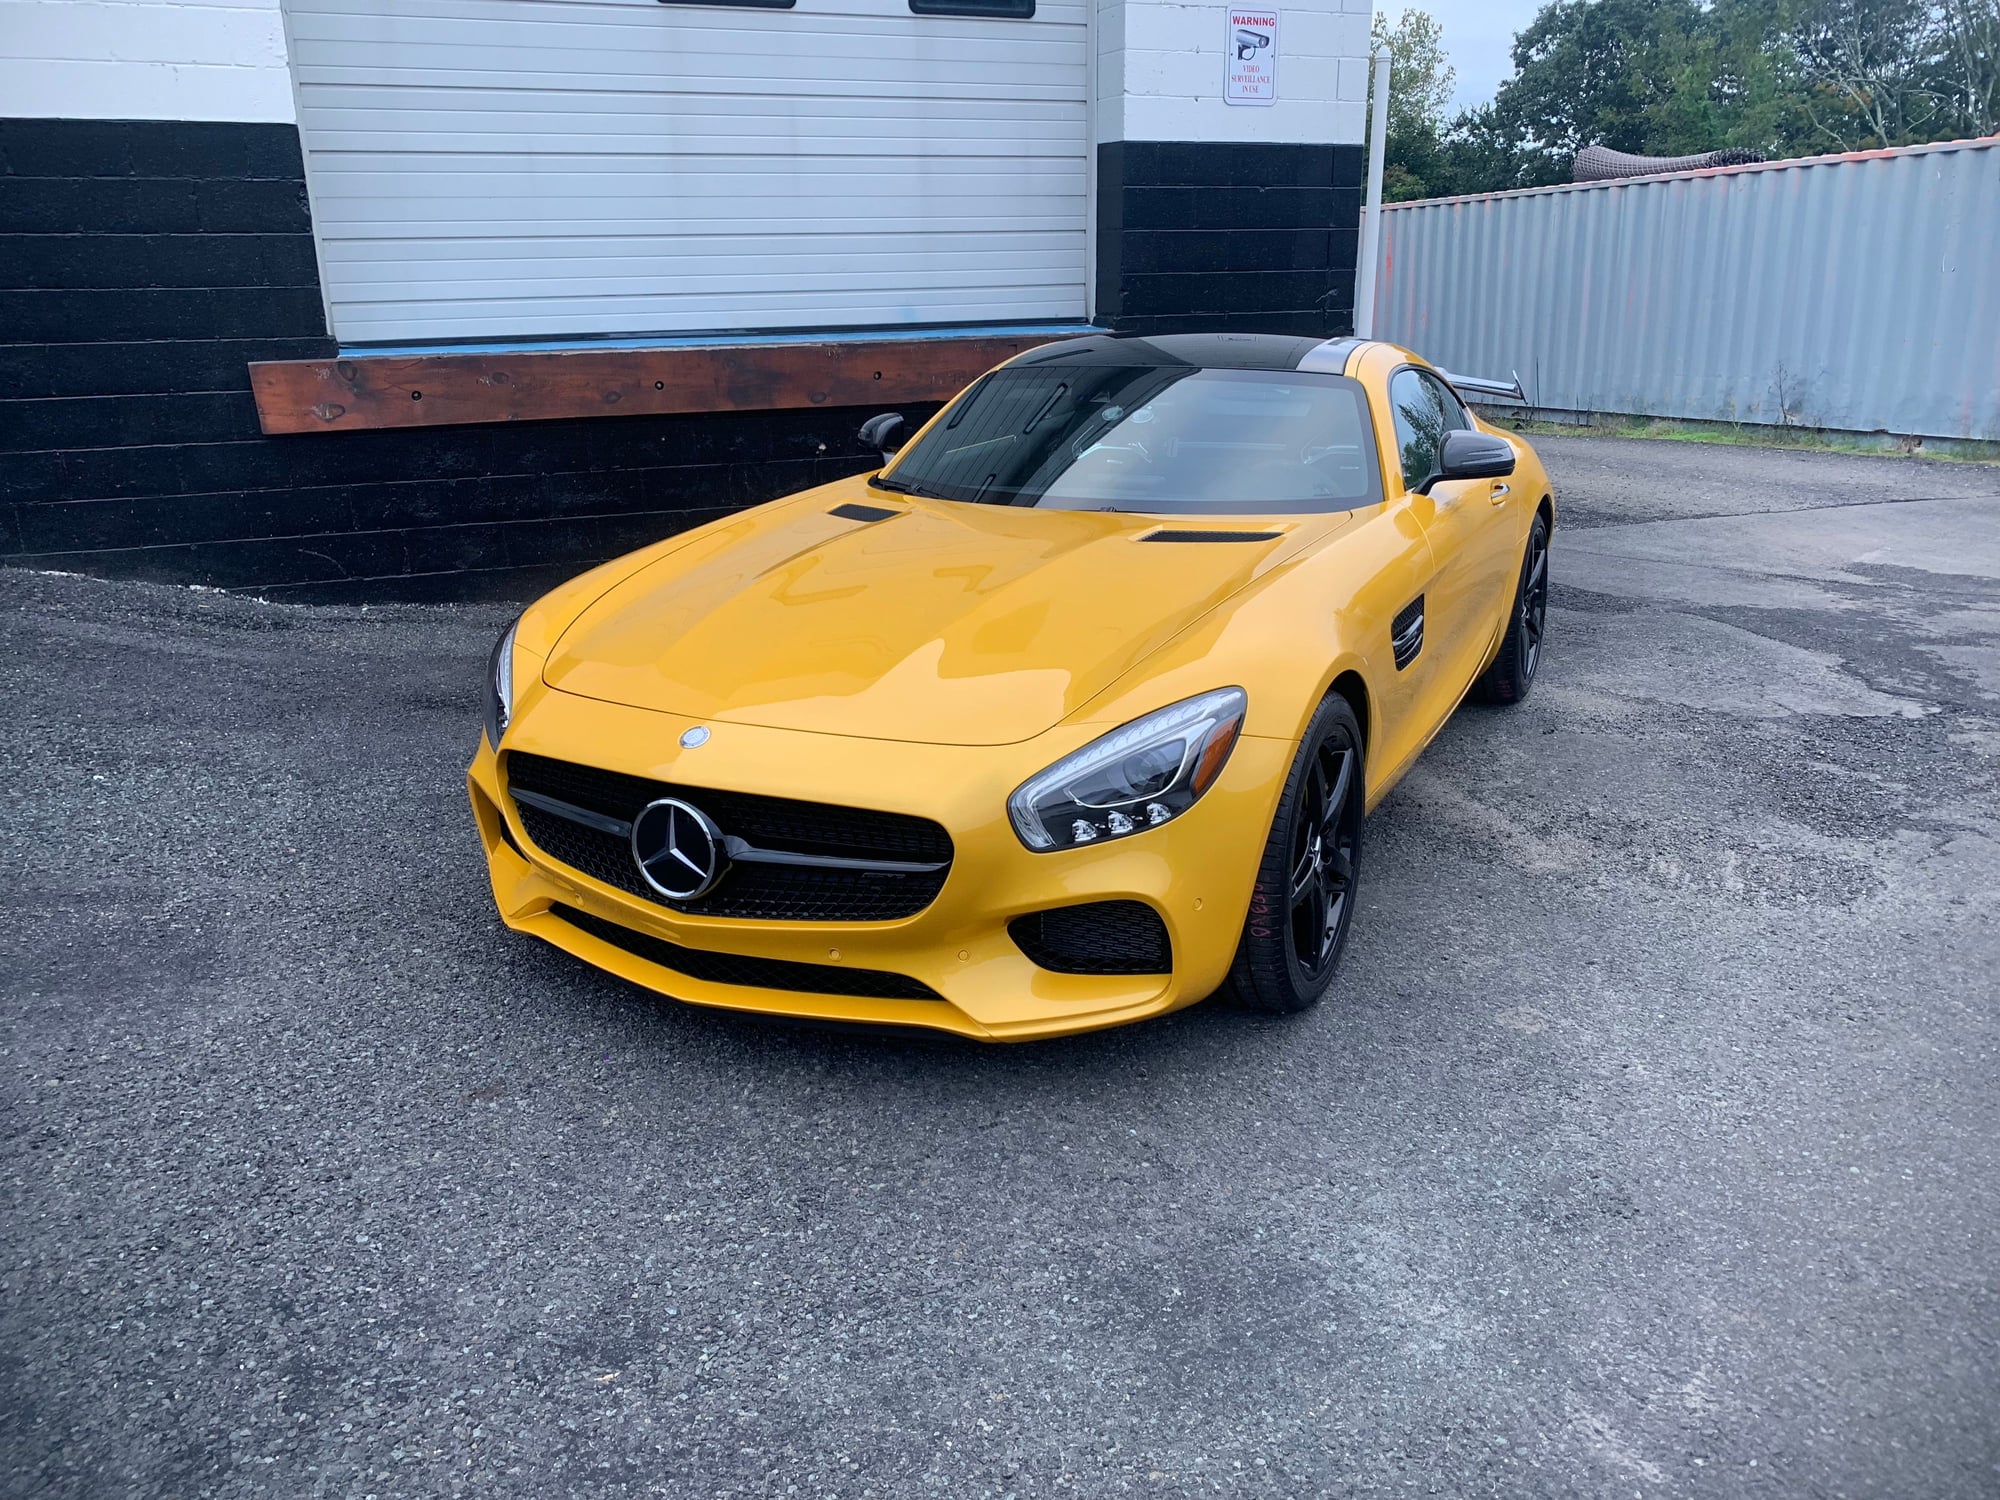 2017 Mercedes-Benz AMG GT - 17 AMG GT  Solarbeam Yellow  only 3500 miles   MSRP $141k  nicely optioned - Used - VIN WDDYJ7HA8HA012043 - 3,500 Miles - 8 cyl - 2WD - Automatic - Coupe - Other - Shelton, CT 06484, United States